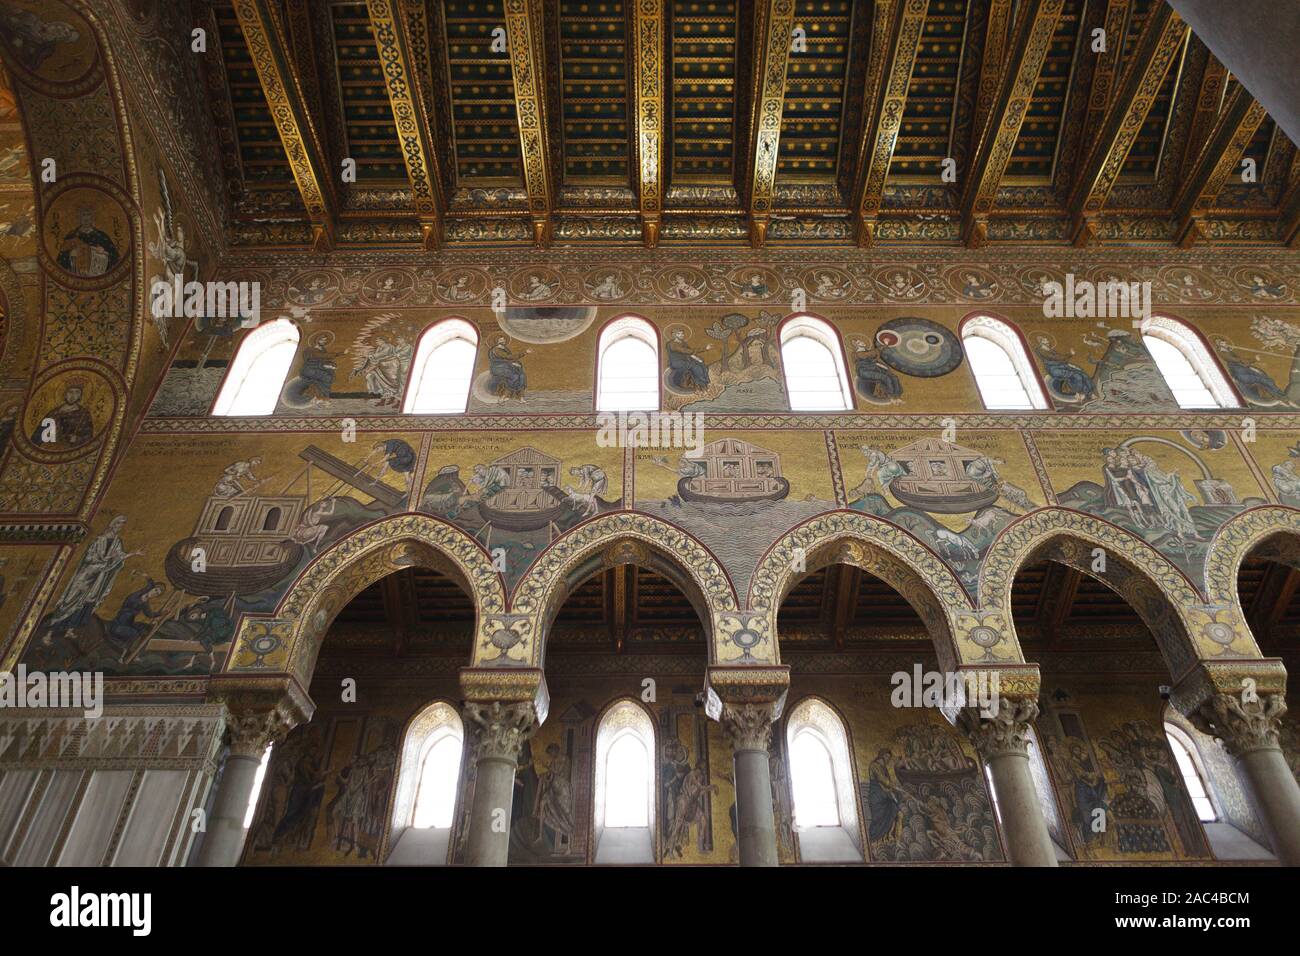 Mosaics in interior of Monreale Cathedral. Monreale, Sicily, Italy Stock Photo